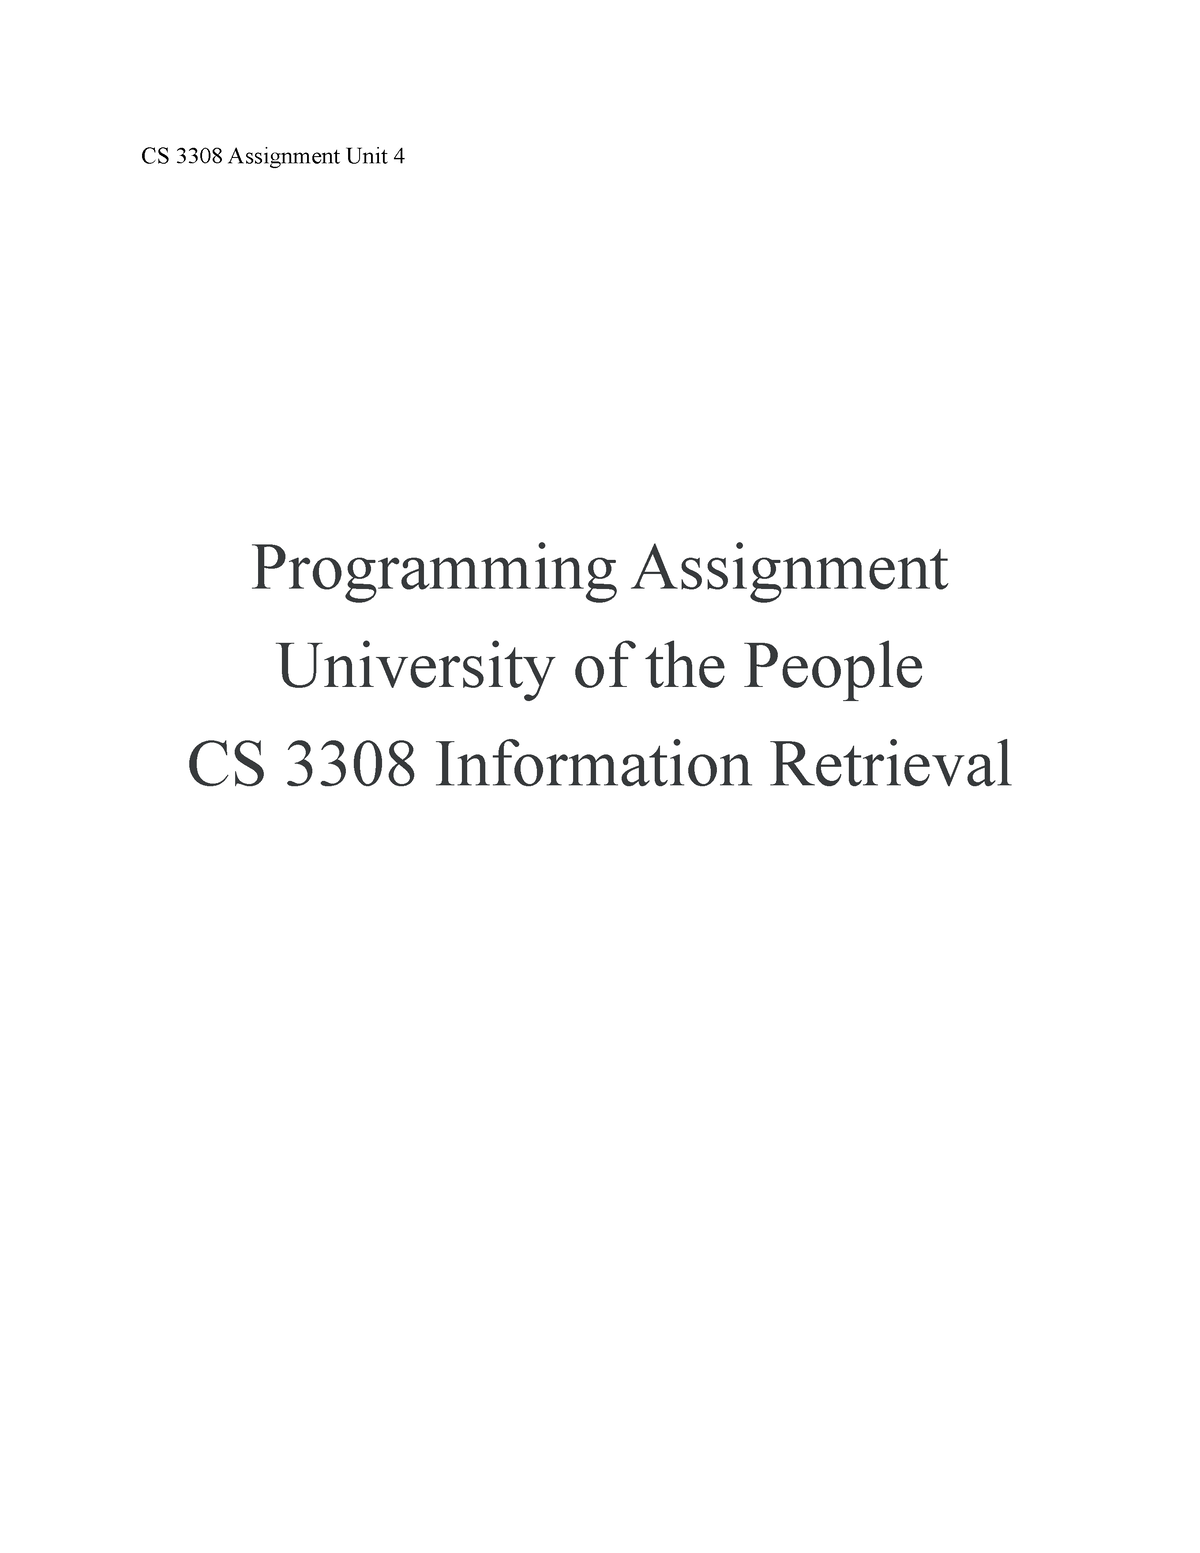 unit 4 programming assignment 1 distinction example